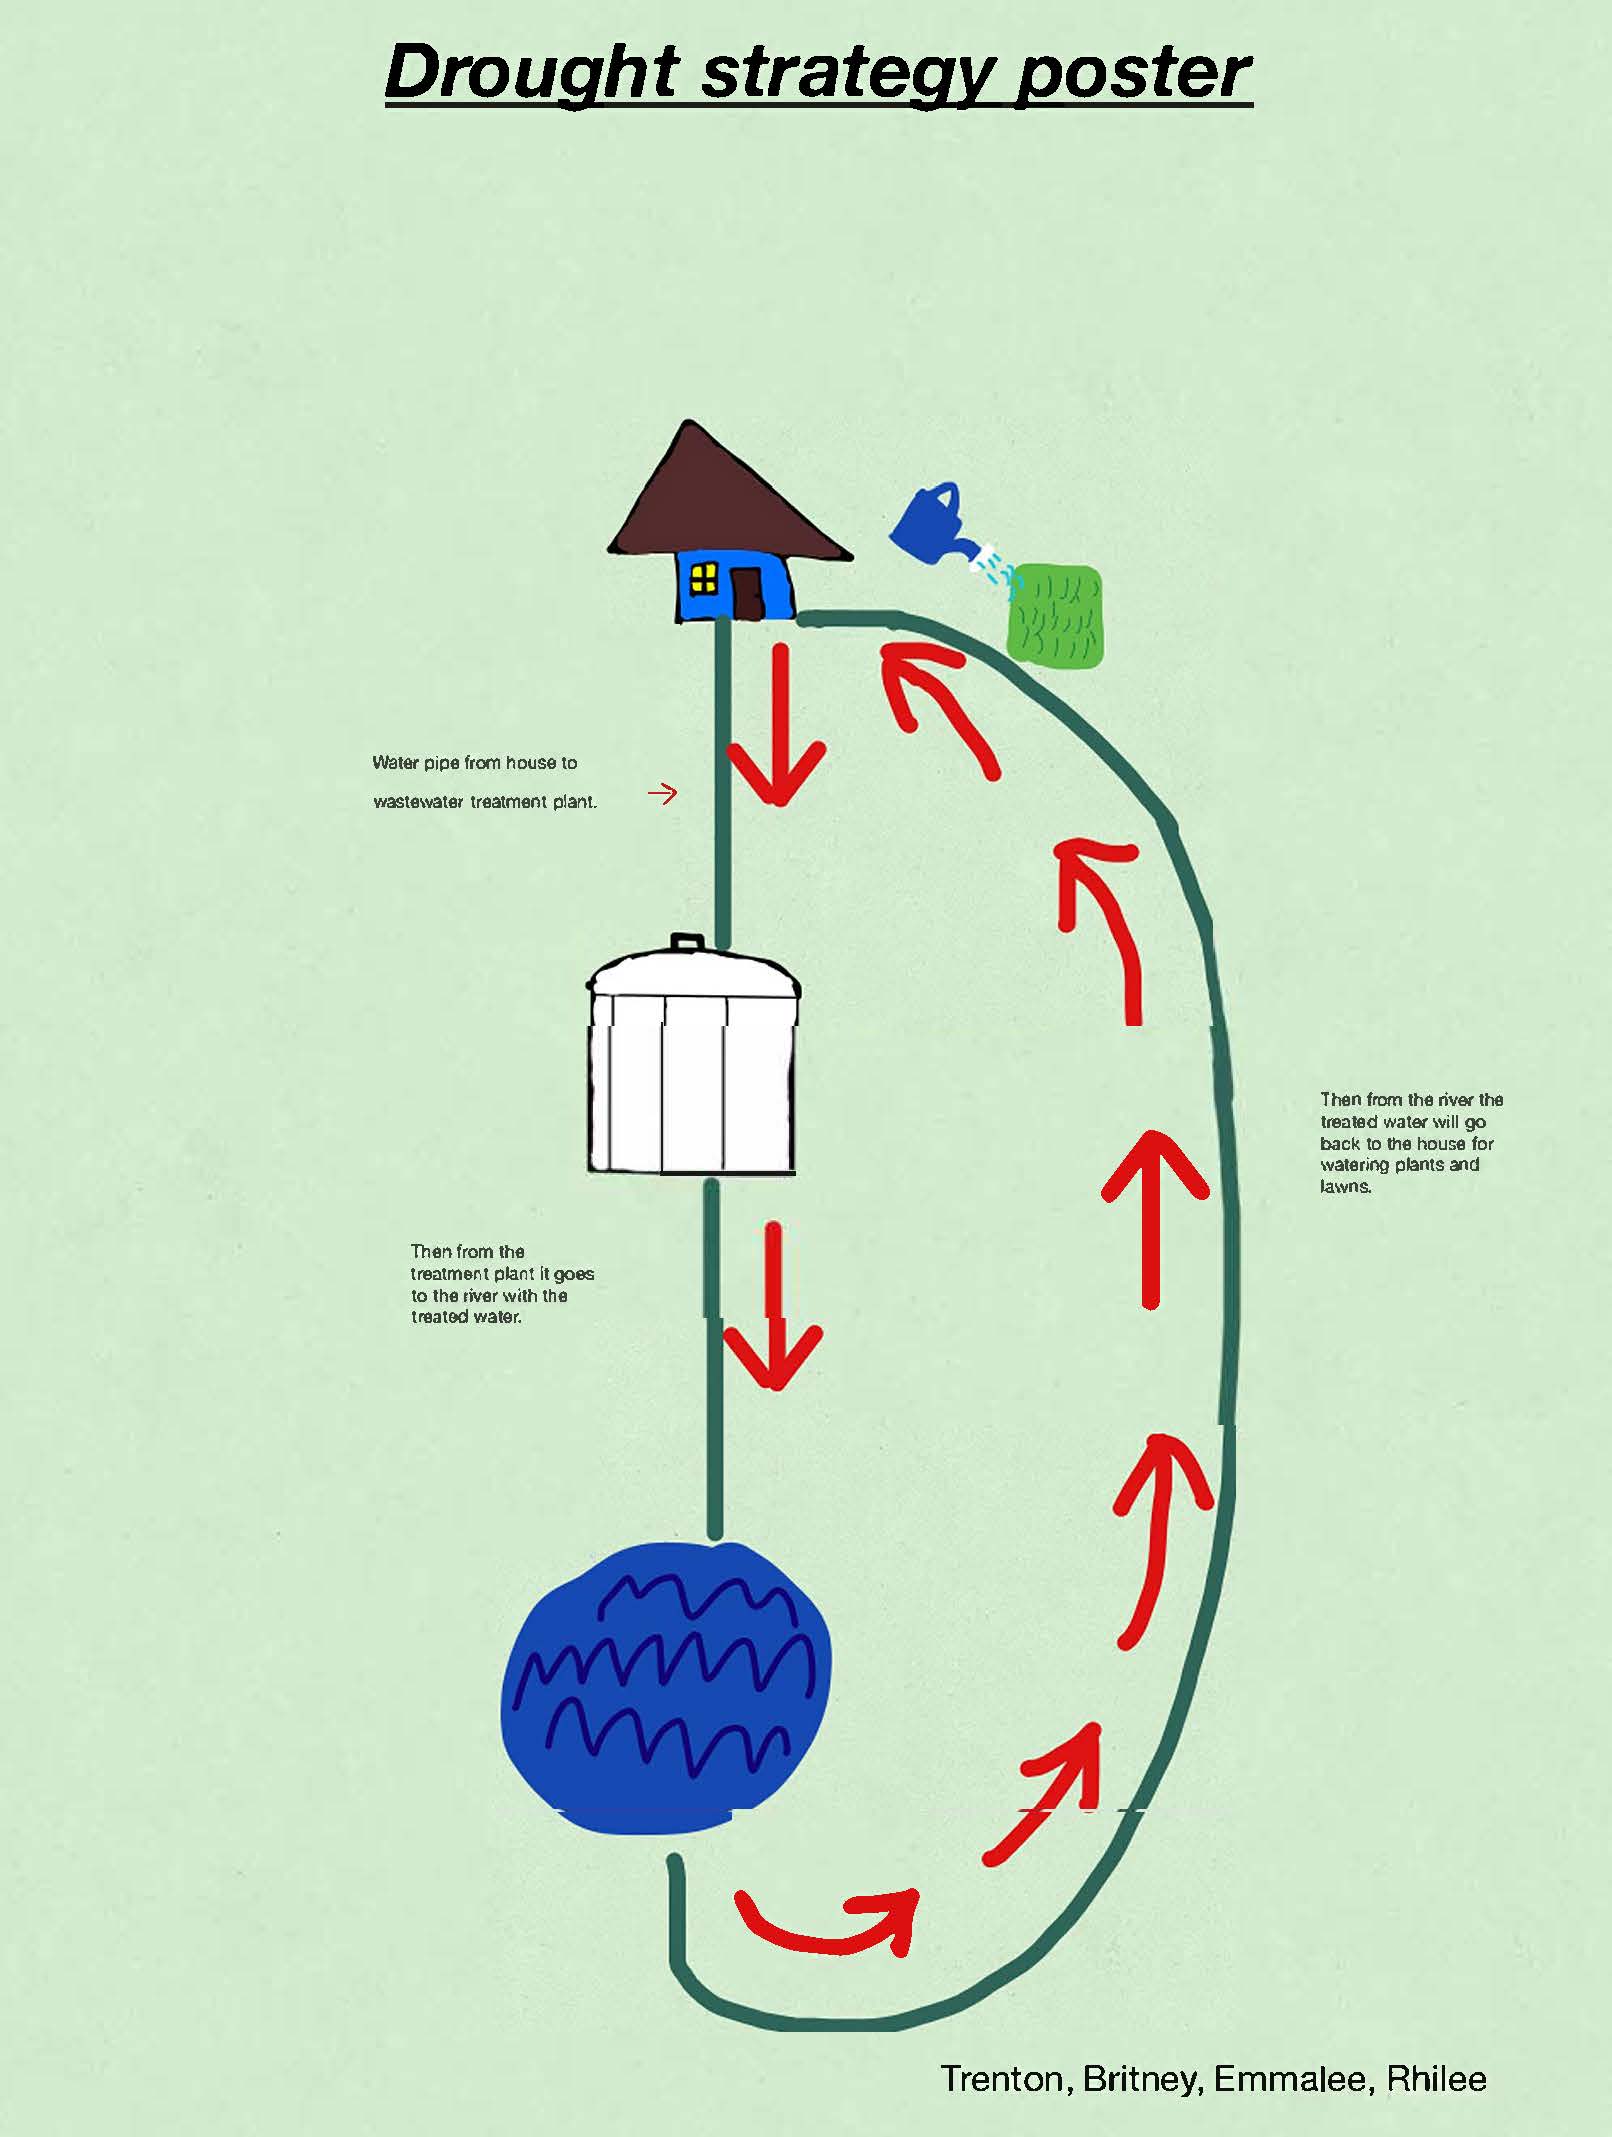 Drought Resilience Strategy Poster: water pipe from the house to treatment plant to treated river then back to the house 